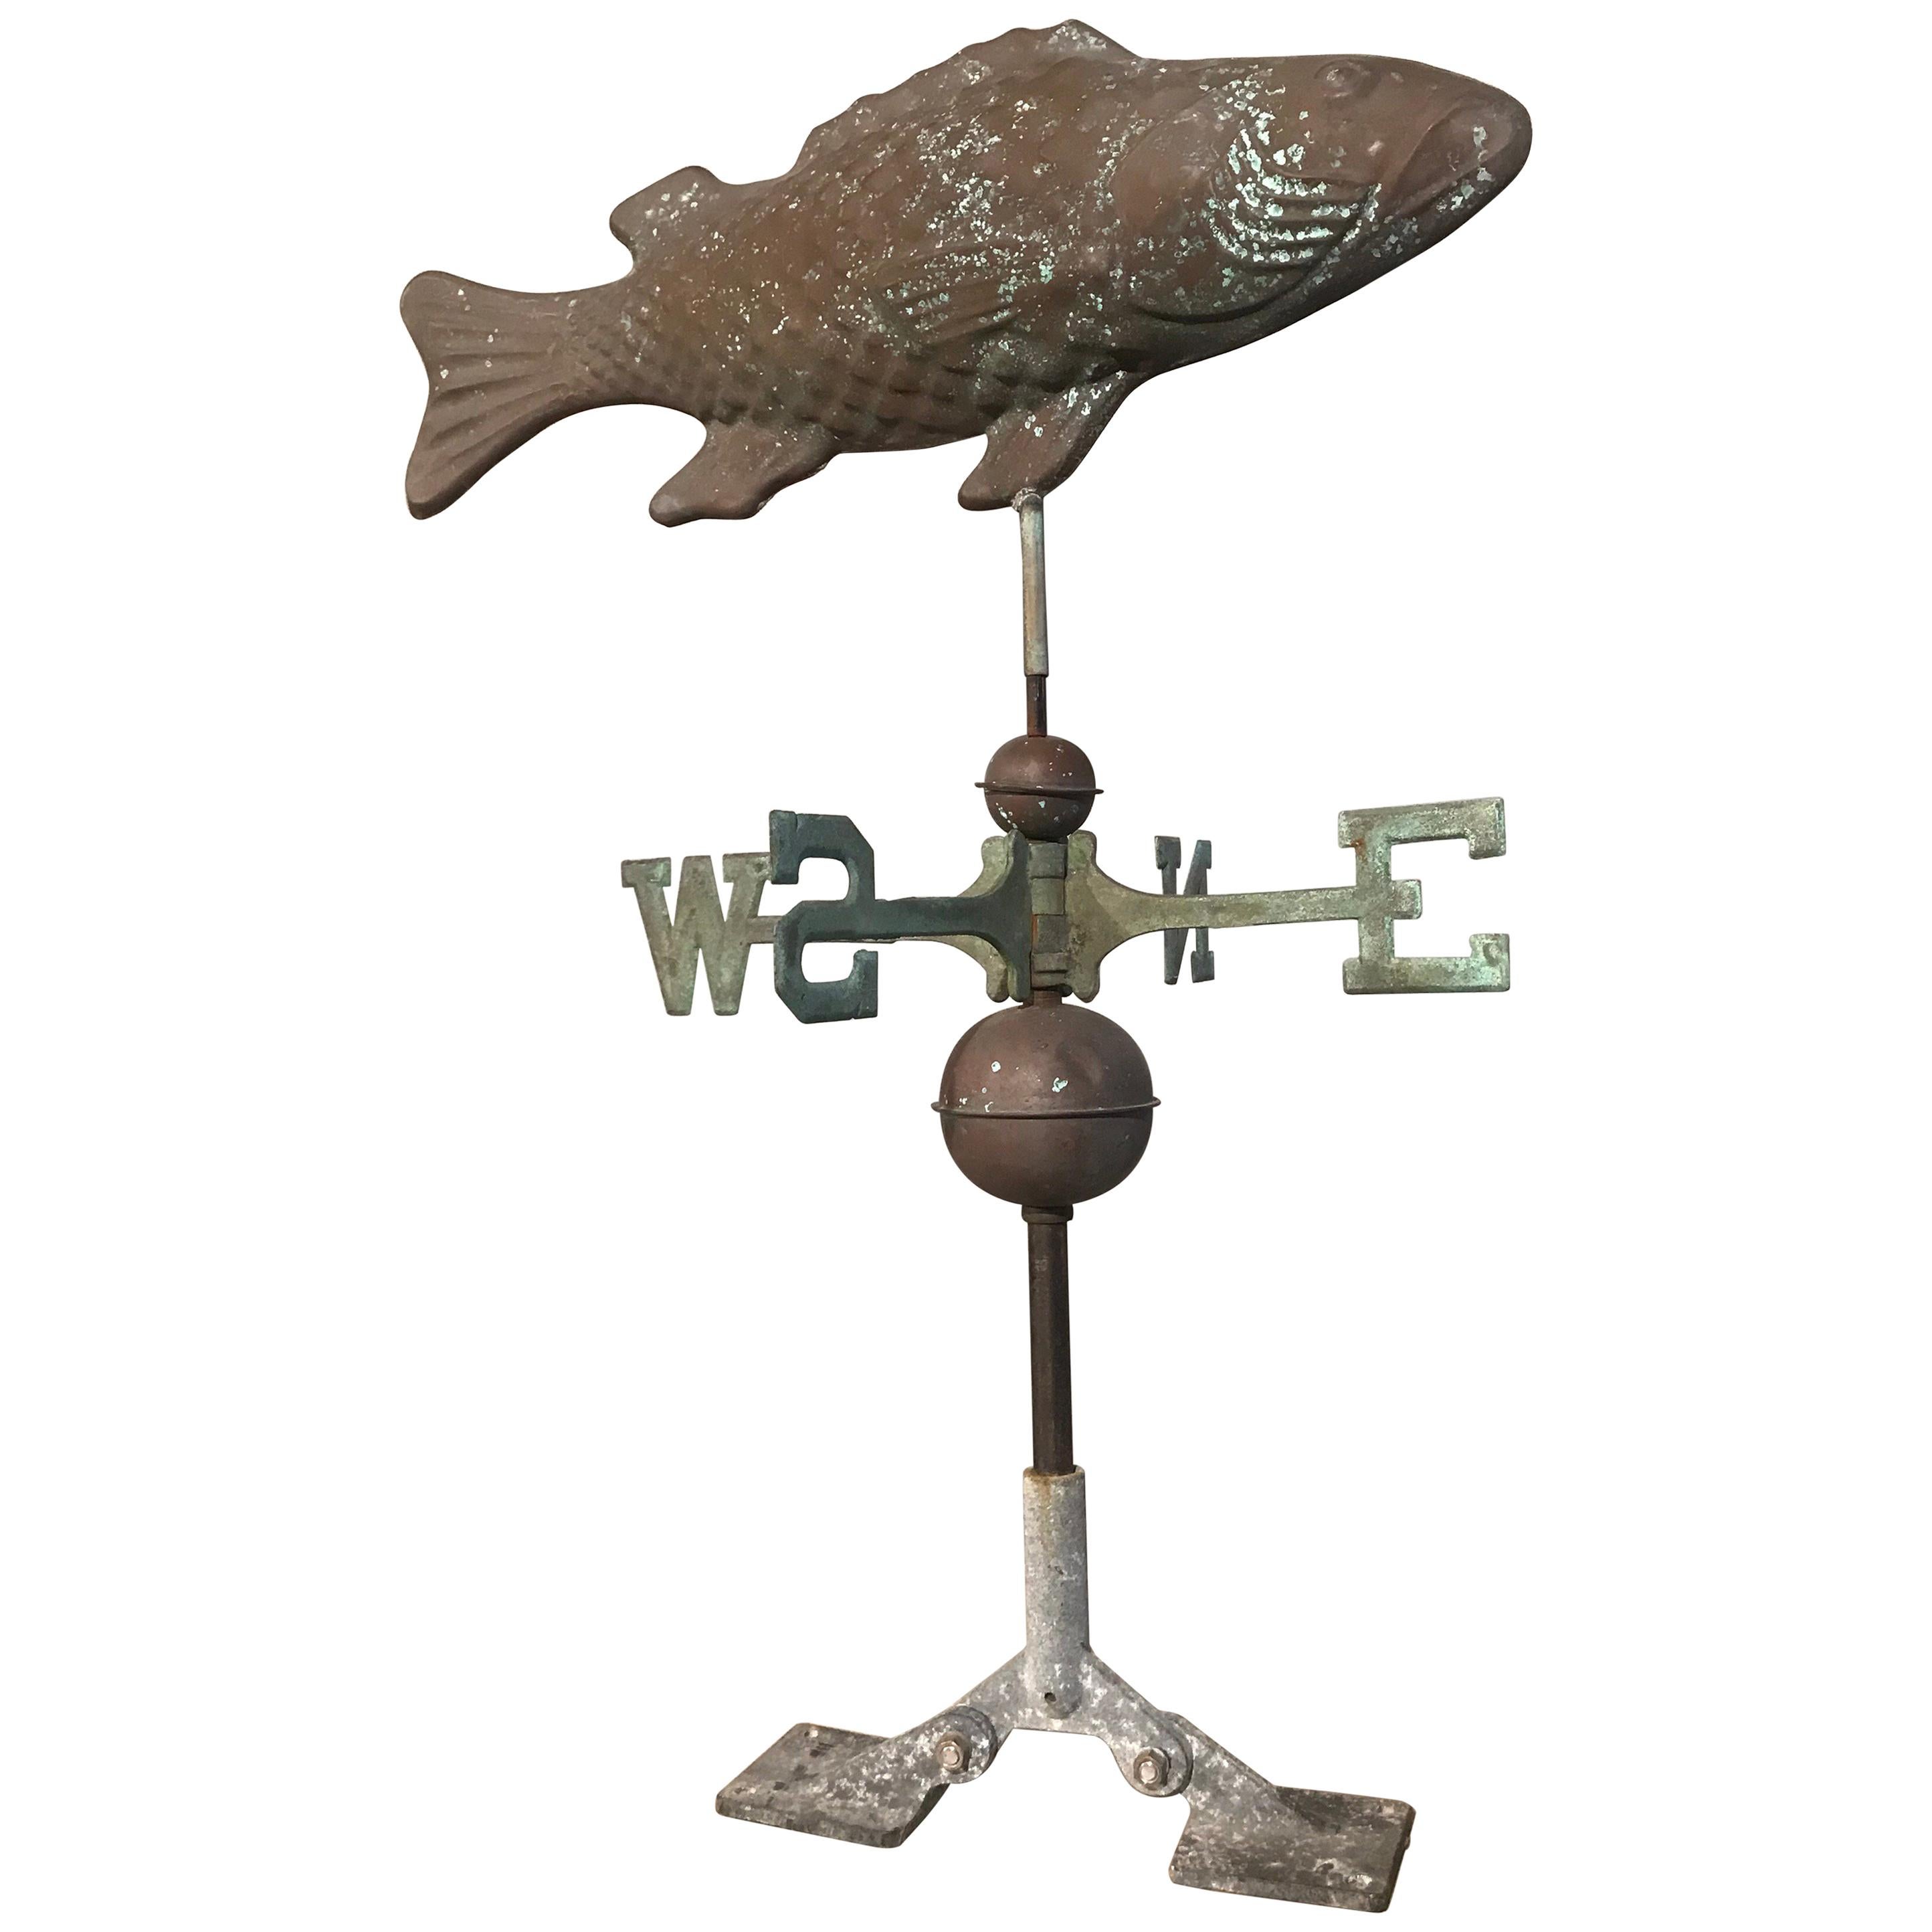 Vintage Fish Weathervane in Copper and Steel